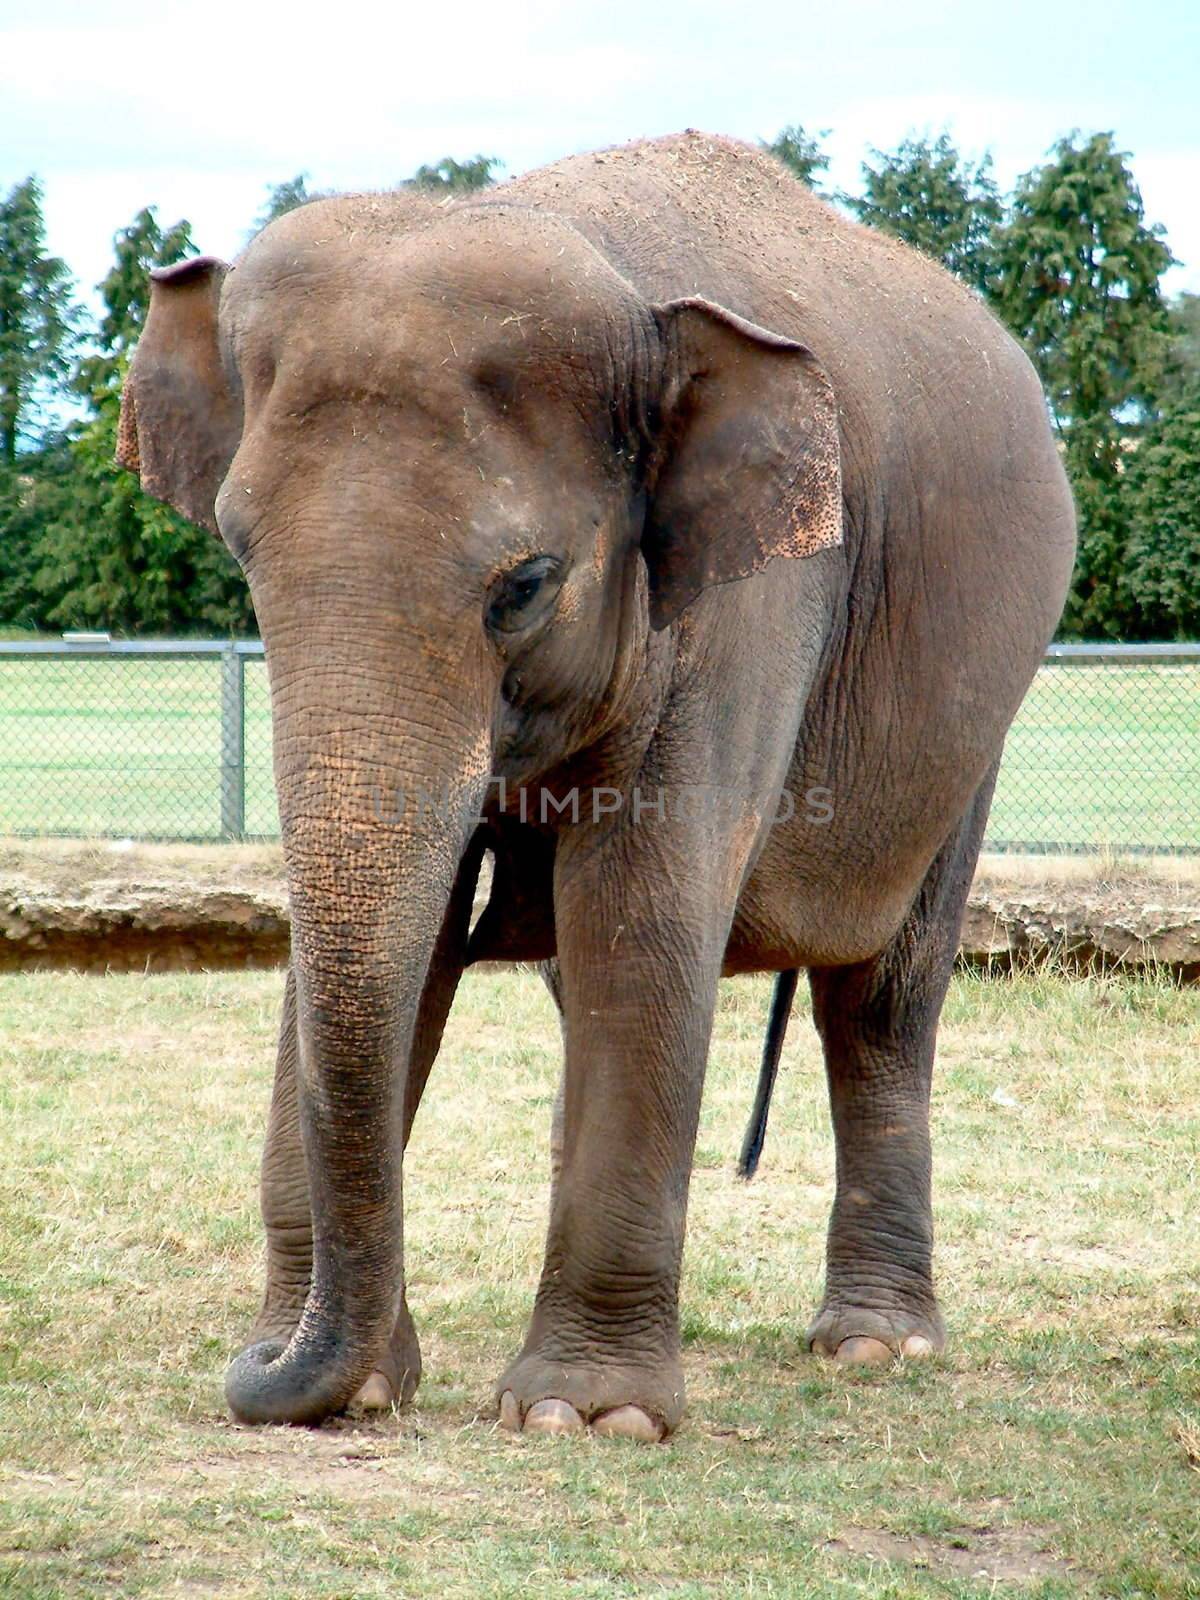 adult elephant by leafy